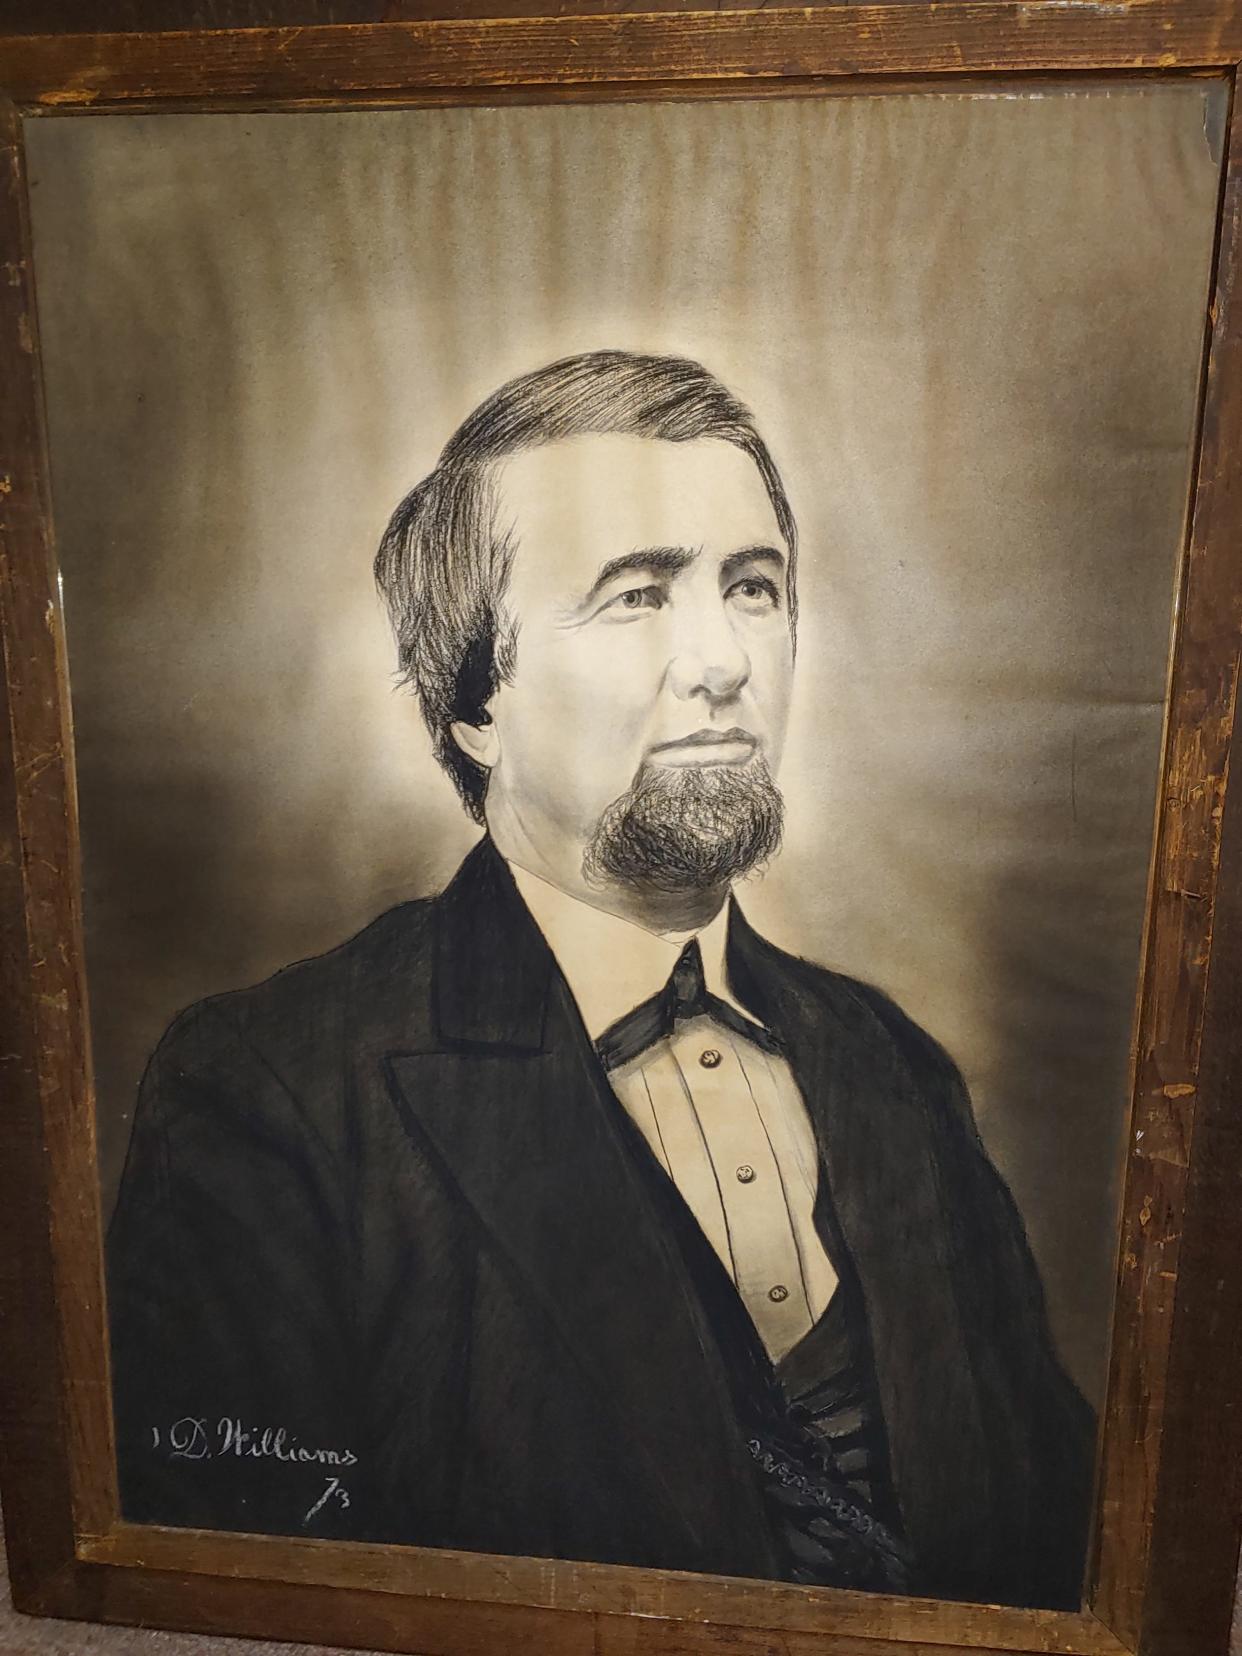 The portrait by artist and businessman Dennis Williams was of a legislator Judge Andrew G. Henry of Greenville, Ill. Williams, a Black man,  lived in Springfield in the late 1800s and was commissioned to do portraits of prominent residents. The portrait turned up in a North Carolina thrift shop before it was identified. [Image property of Andrew Cook; published with permission]